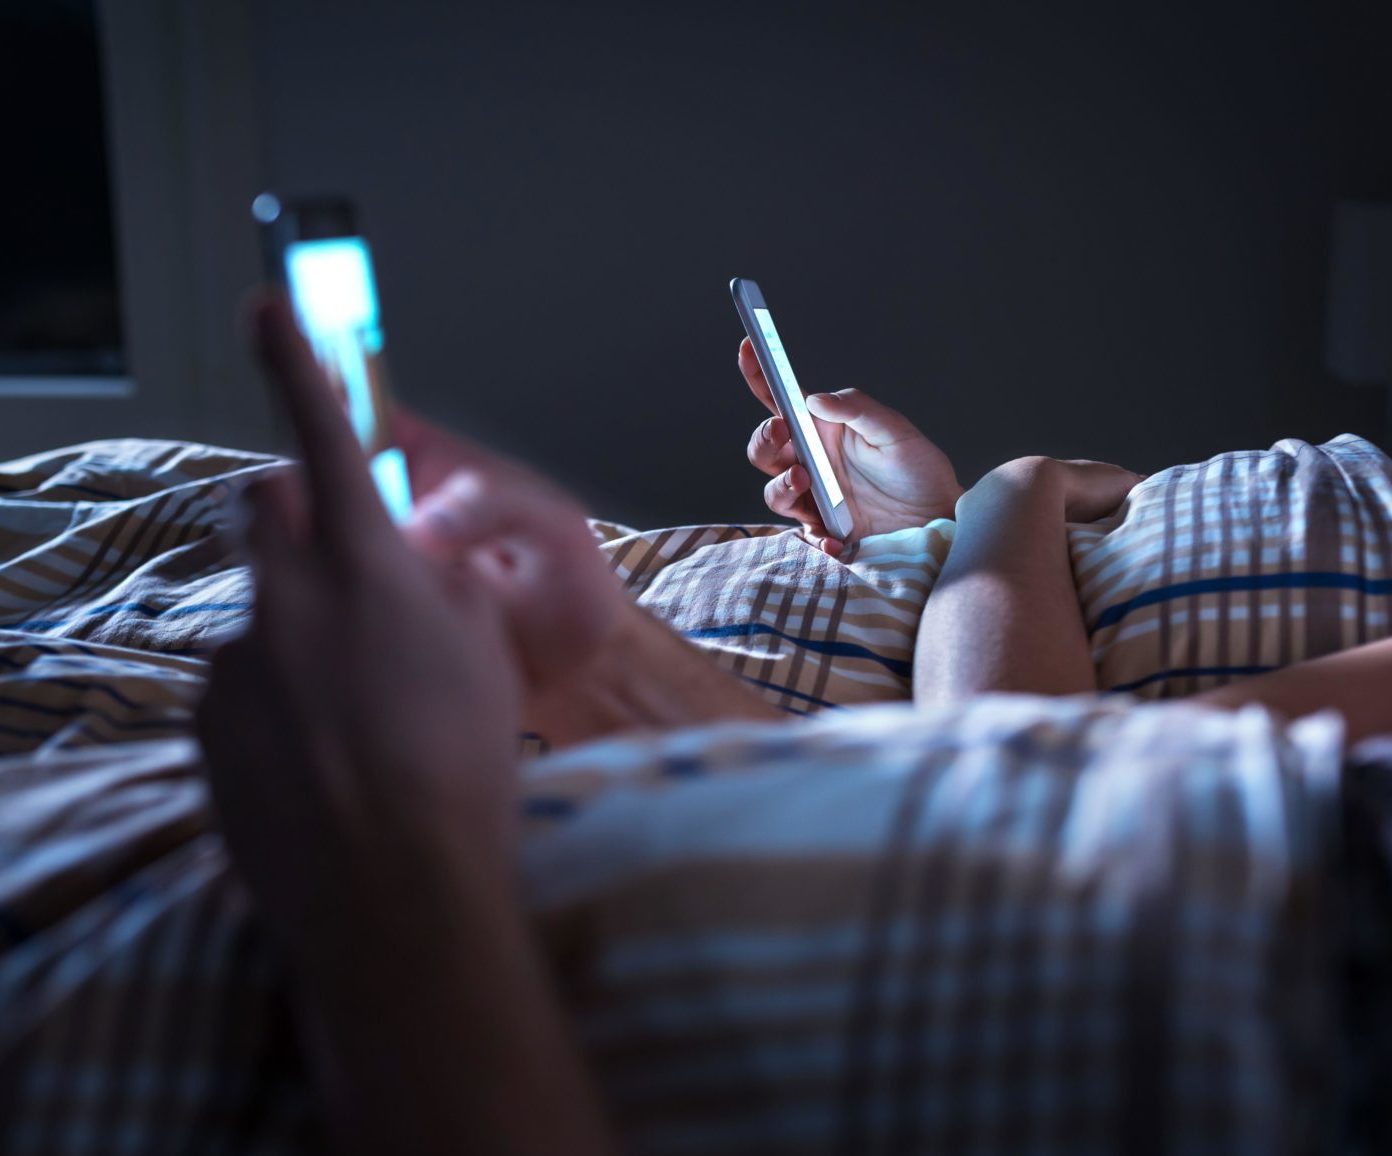 A couple ignoring each other lying in bed at night while using mobile phones